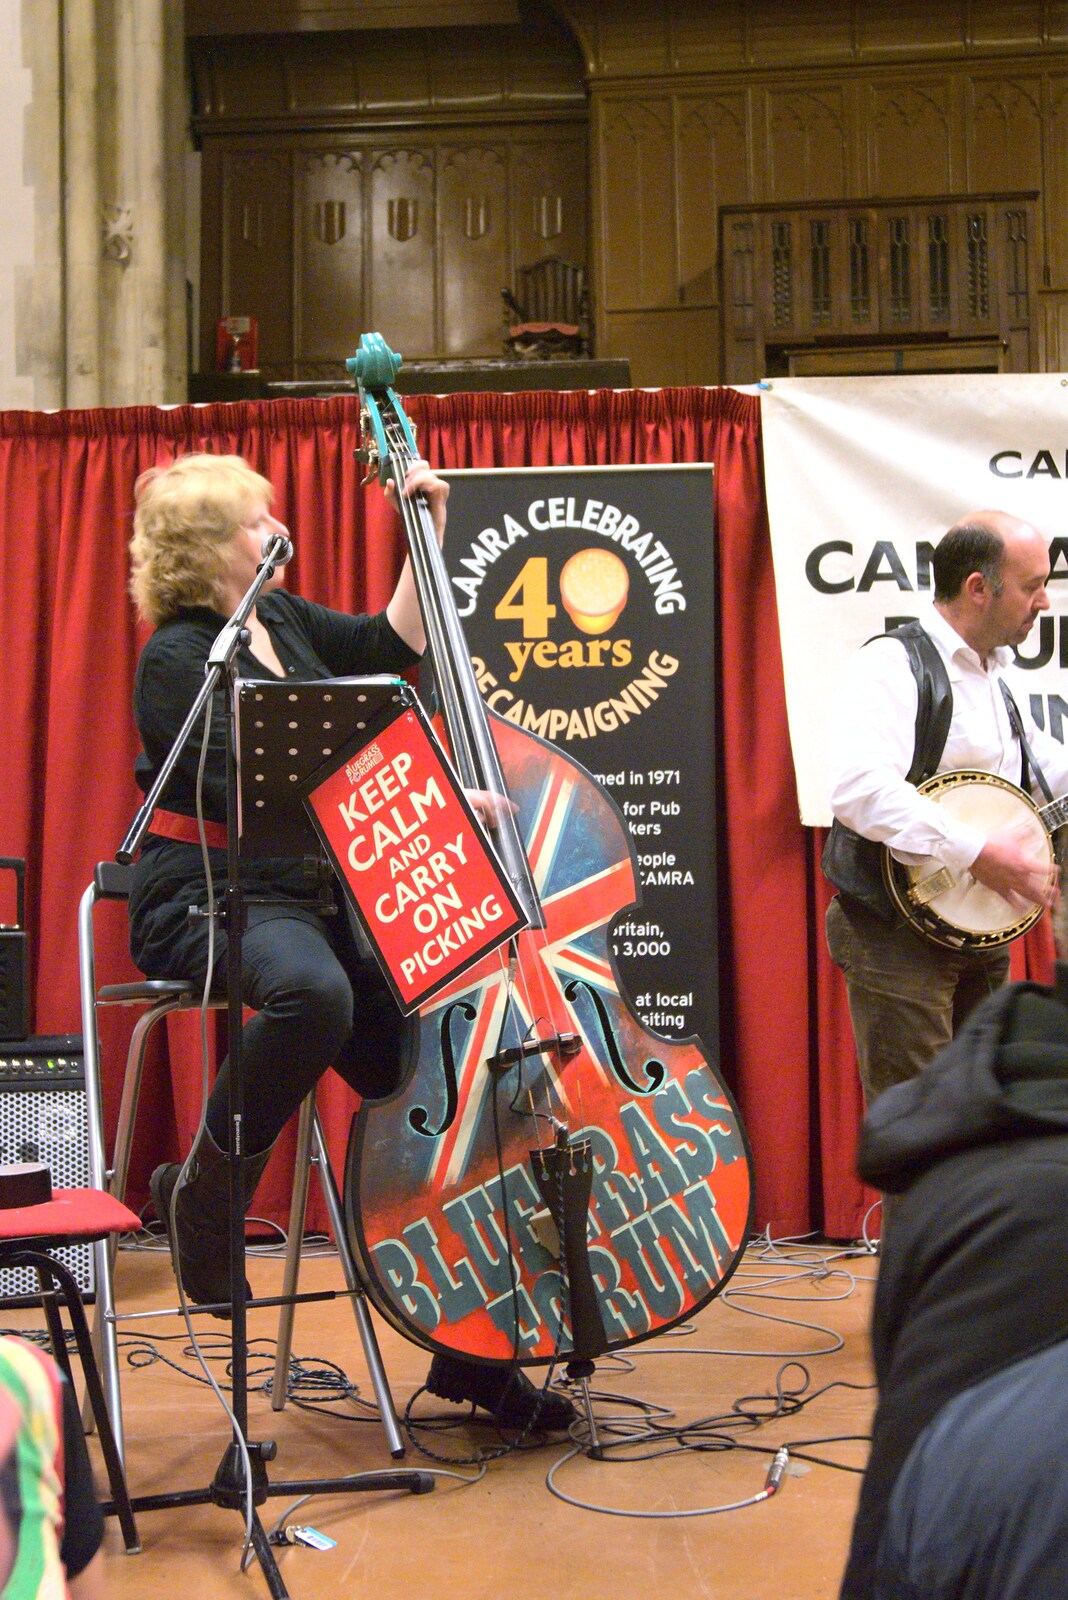 A patriotic Double Bass from The CAMRA Norwich Beer Festival, St. Andrew's Hall, Norwich - 26th October 2011